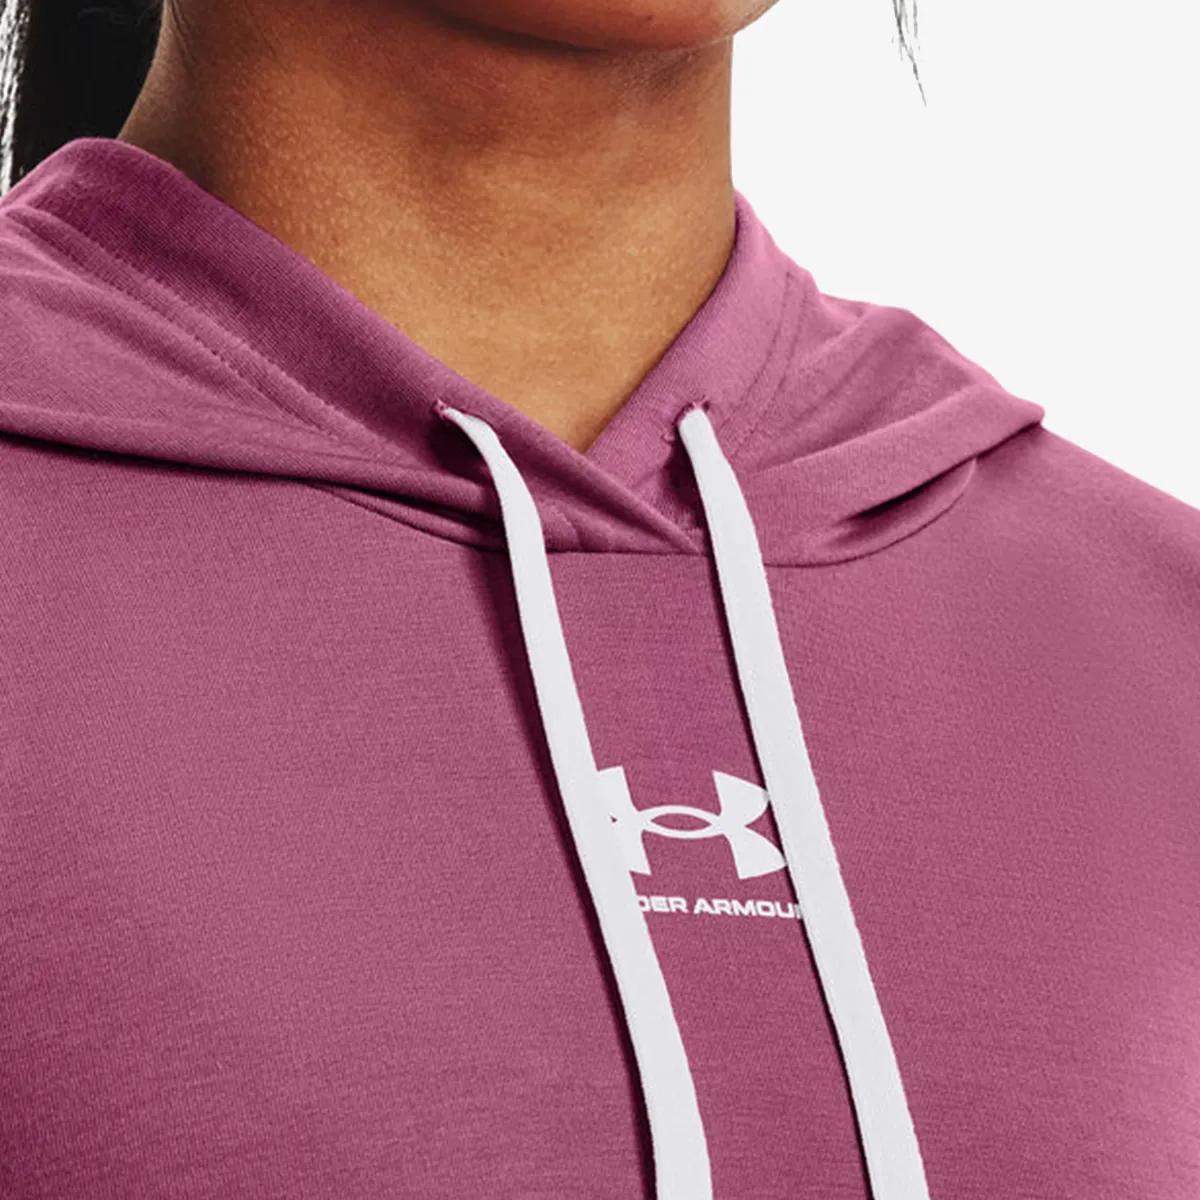 Under Armour Rival 